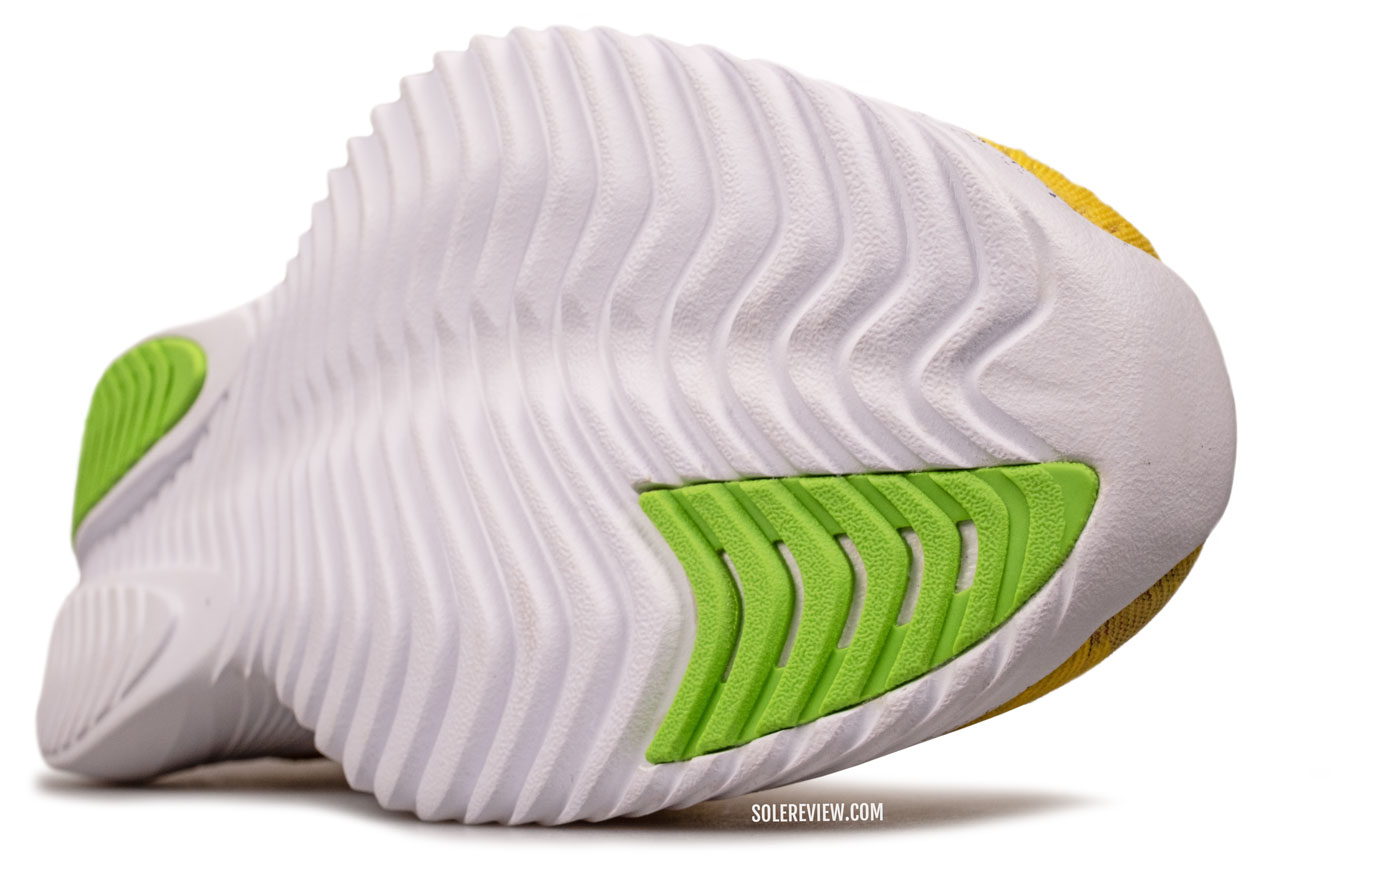 The forefoot outsole of the Saucony Kinvara 14.